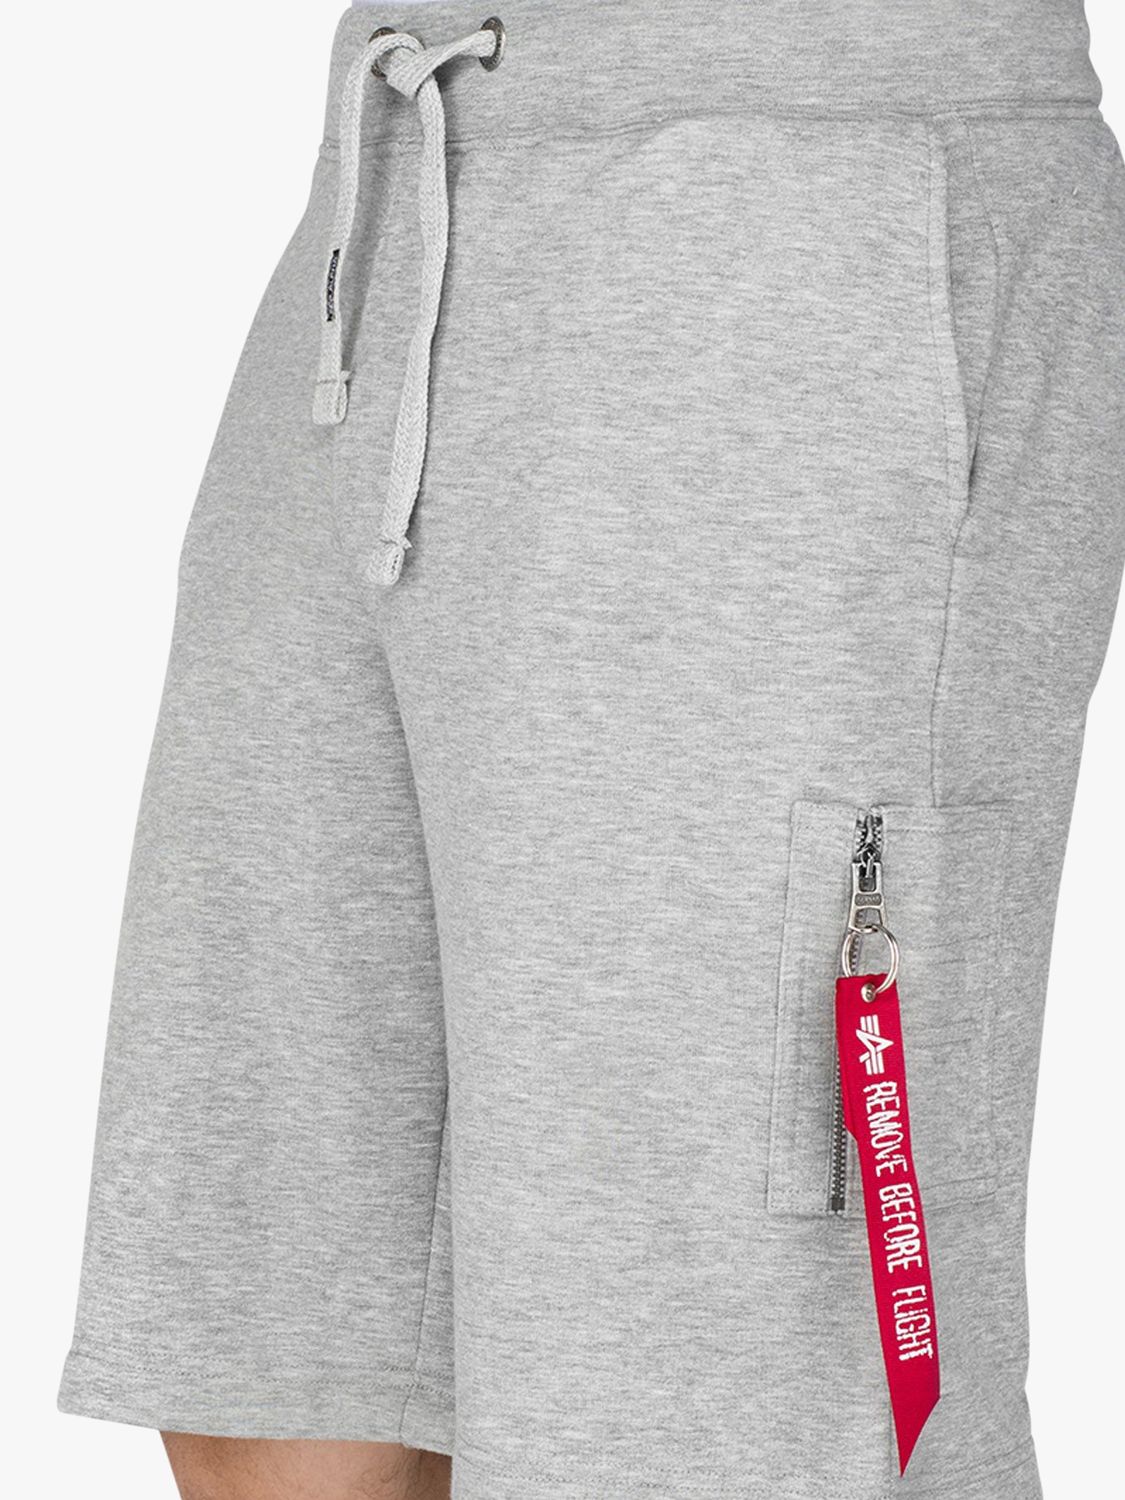 Grey Heather Sweat Shorts, John 17 Alpha Industries Cargo Partners & Lewis at X-Fit